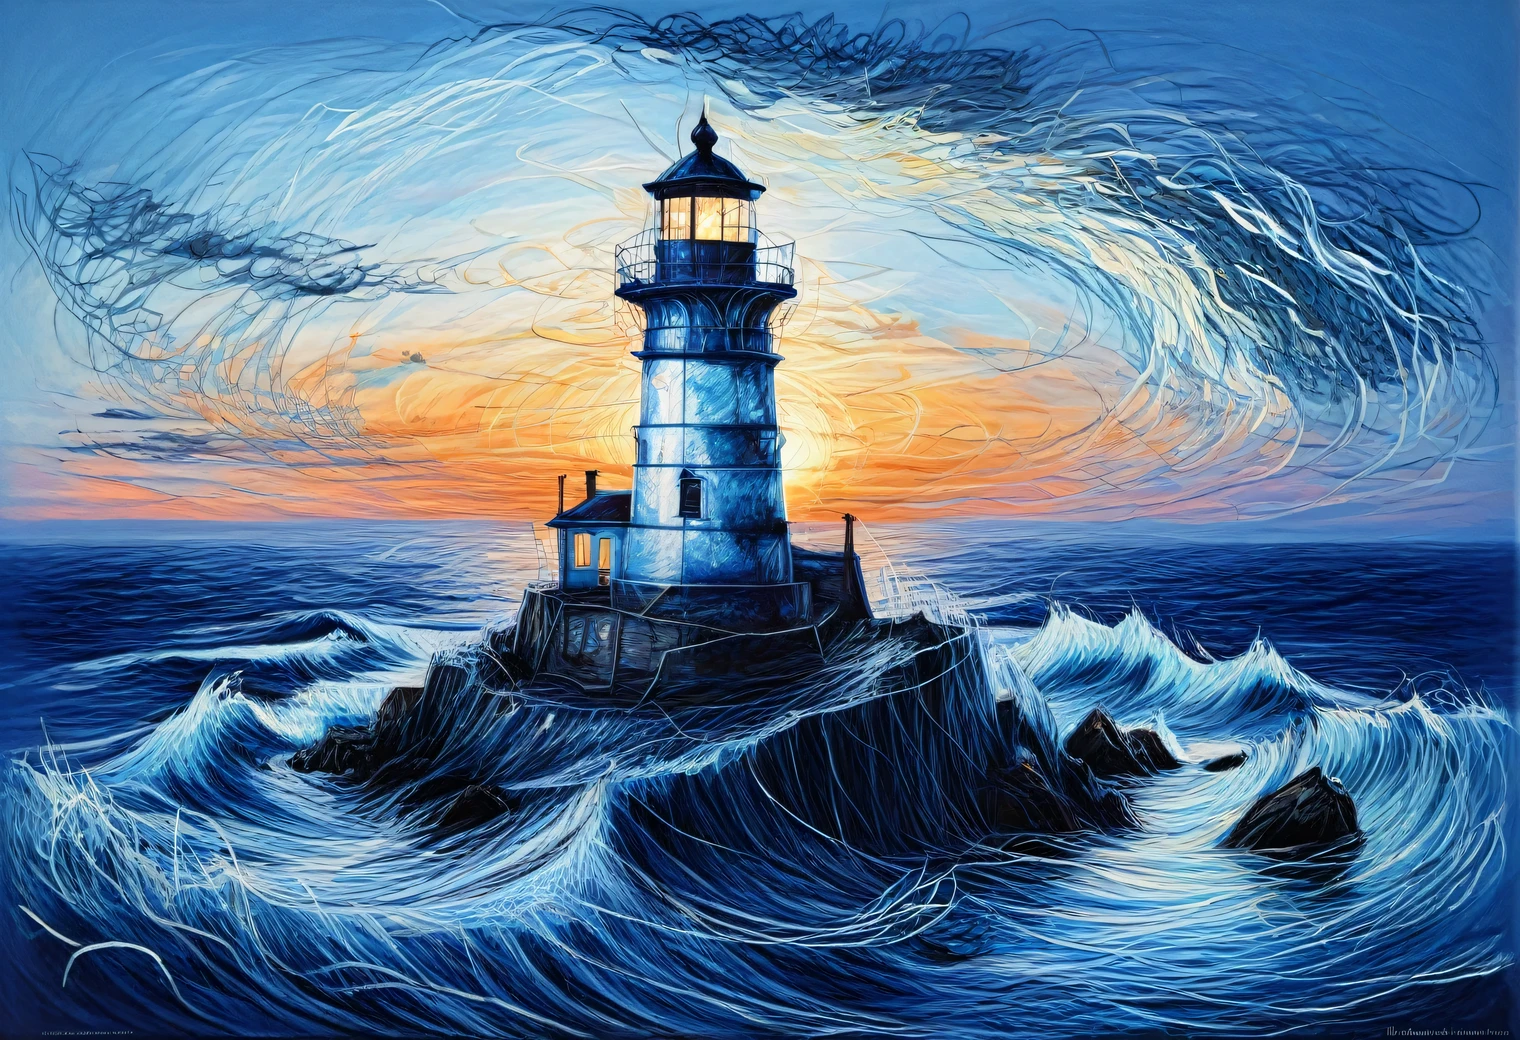 A two-layer painting with the effect of surreal volume by superimposing layers with different styles, a surreal grotesque image ((Blue Coast)) at sunset on one layer surrounded by an elegant intricate patterned edging made by the second layer, the combination of two layers creates the illusion of volume, canvas, acrylic, clarity, filigree